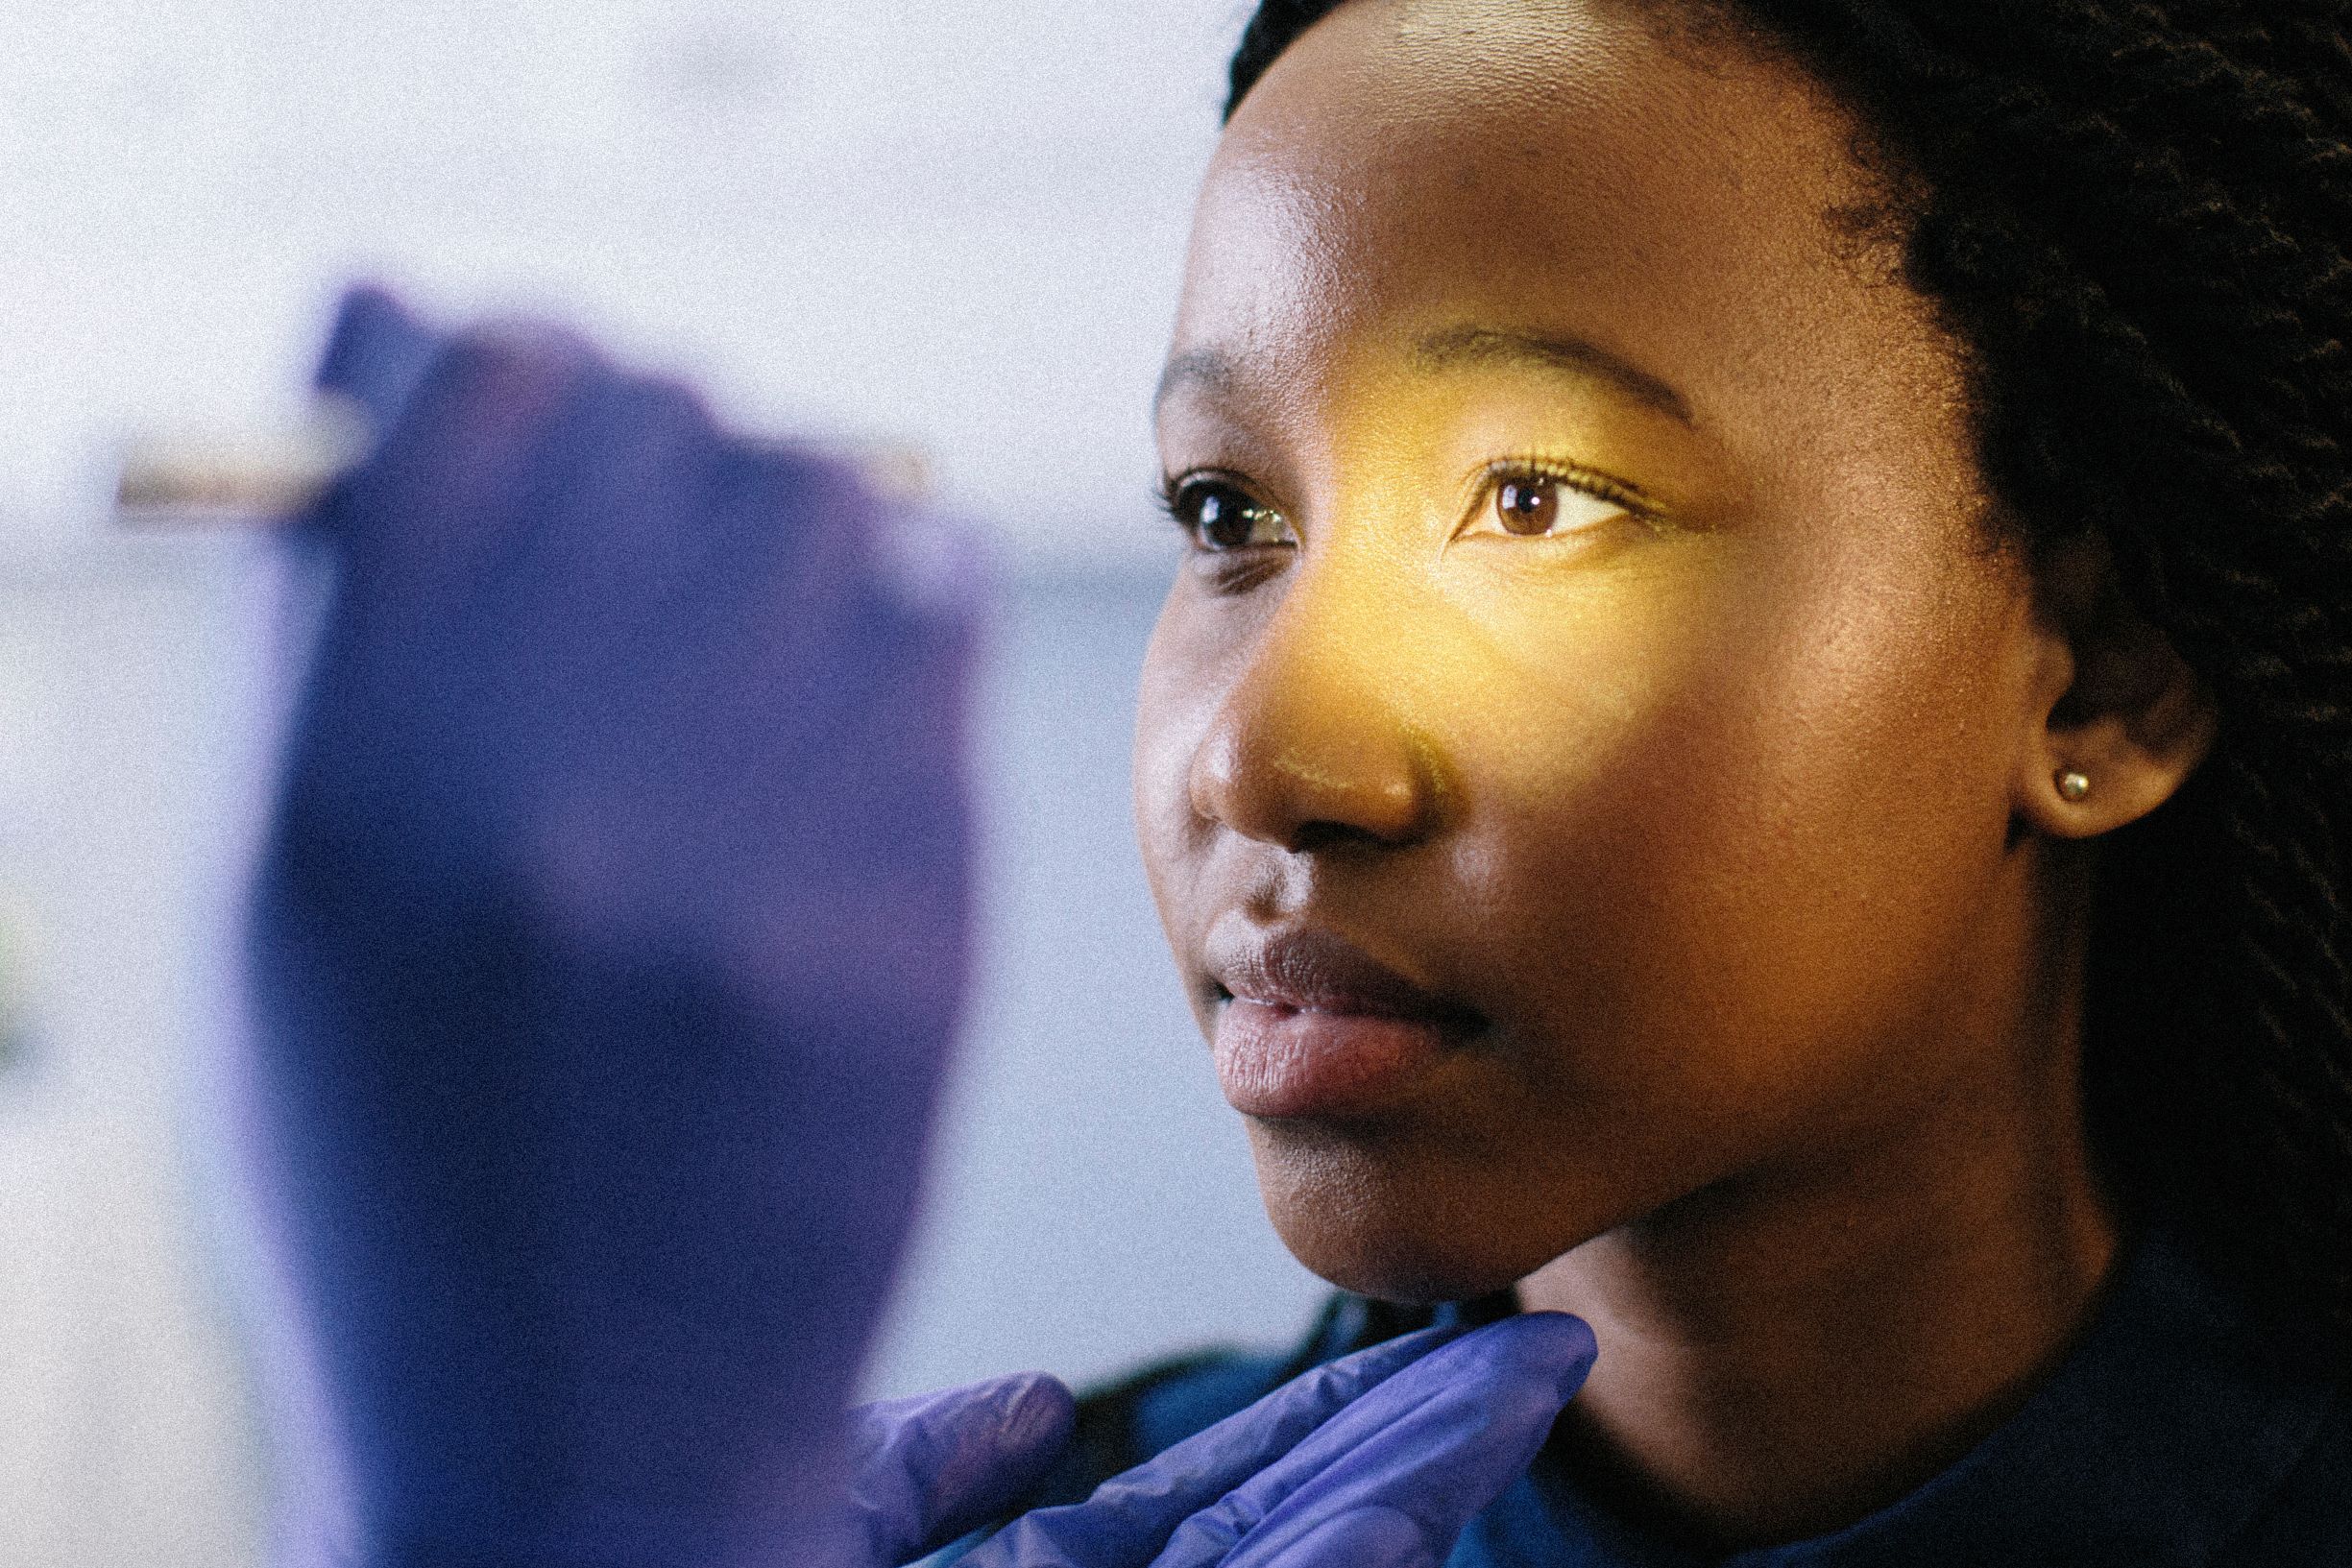 A light shines on a young woman during an eye exam. Eye health and heart health are related in several ways.